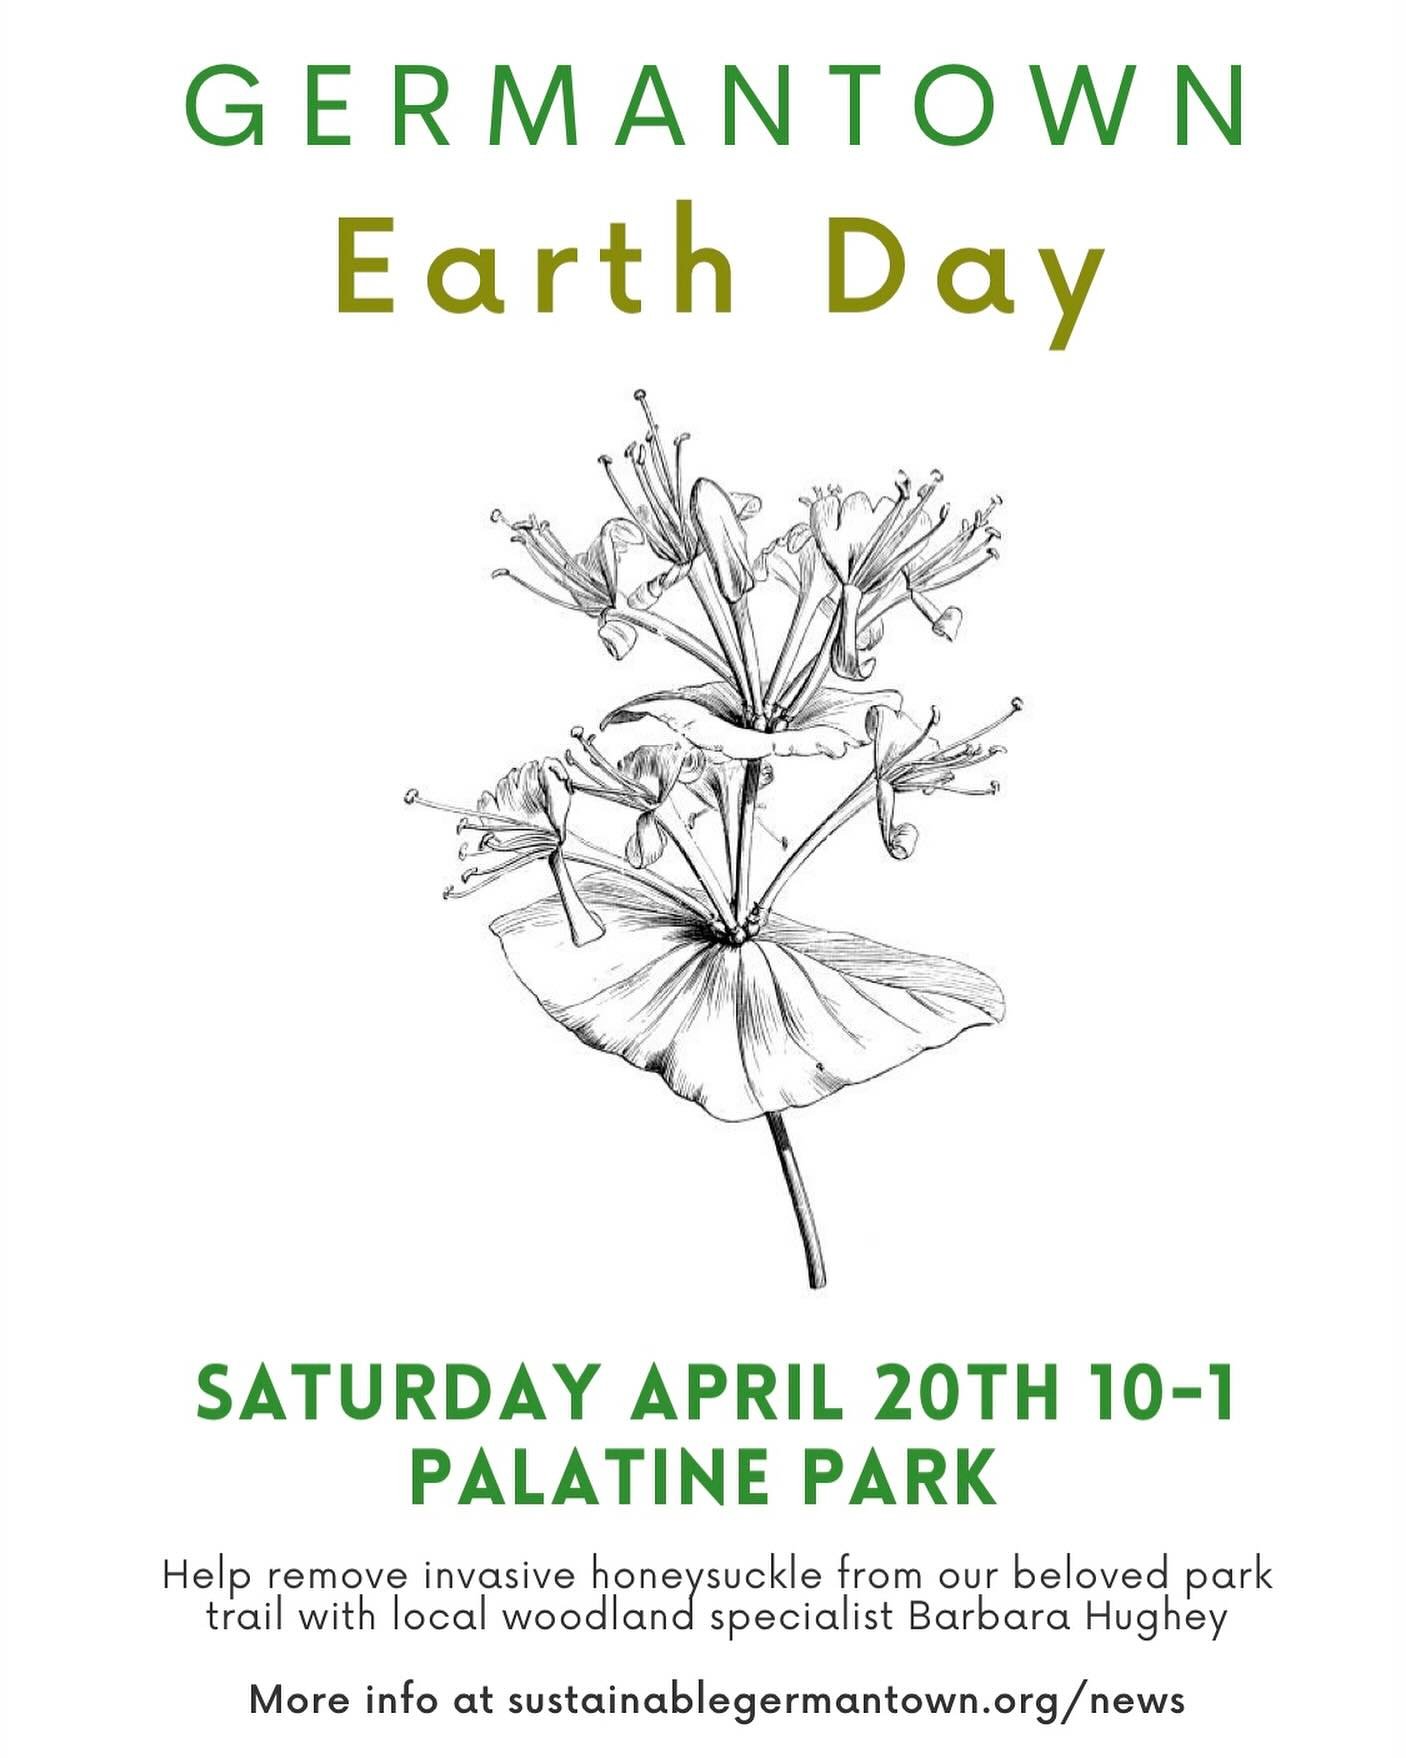 In honor of Earth Day, Germantown elementary school students will learn about the plants growing along the Palatine Park nature trail on Friday, April 19th, 2024. Building upon work started last year, the students will learn to identify and pull Euro